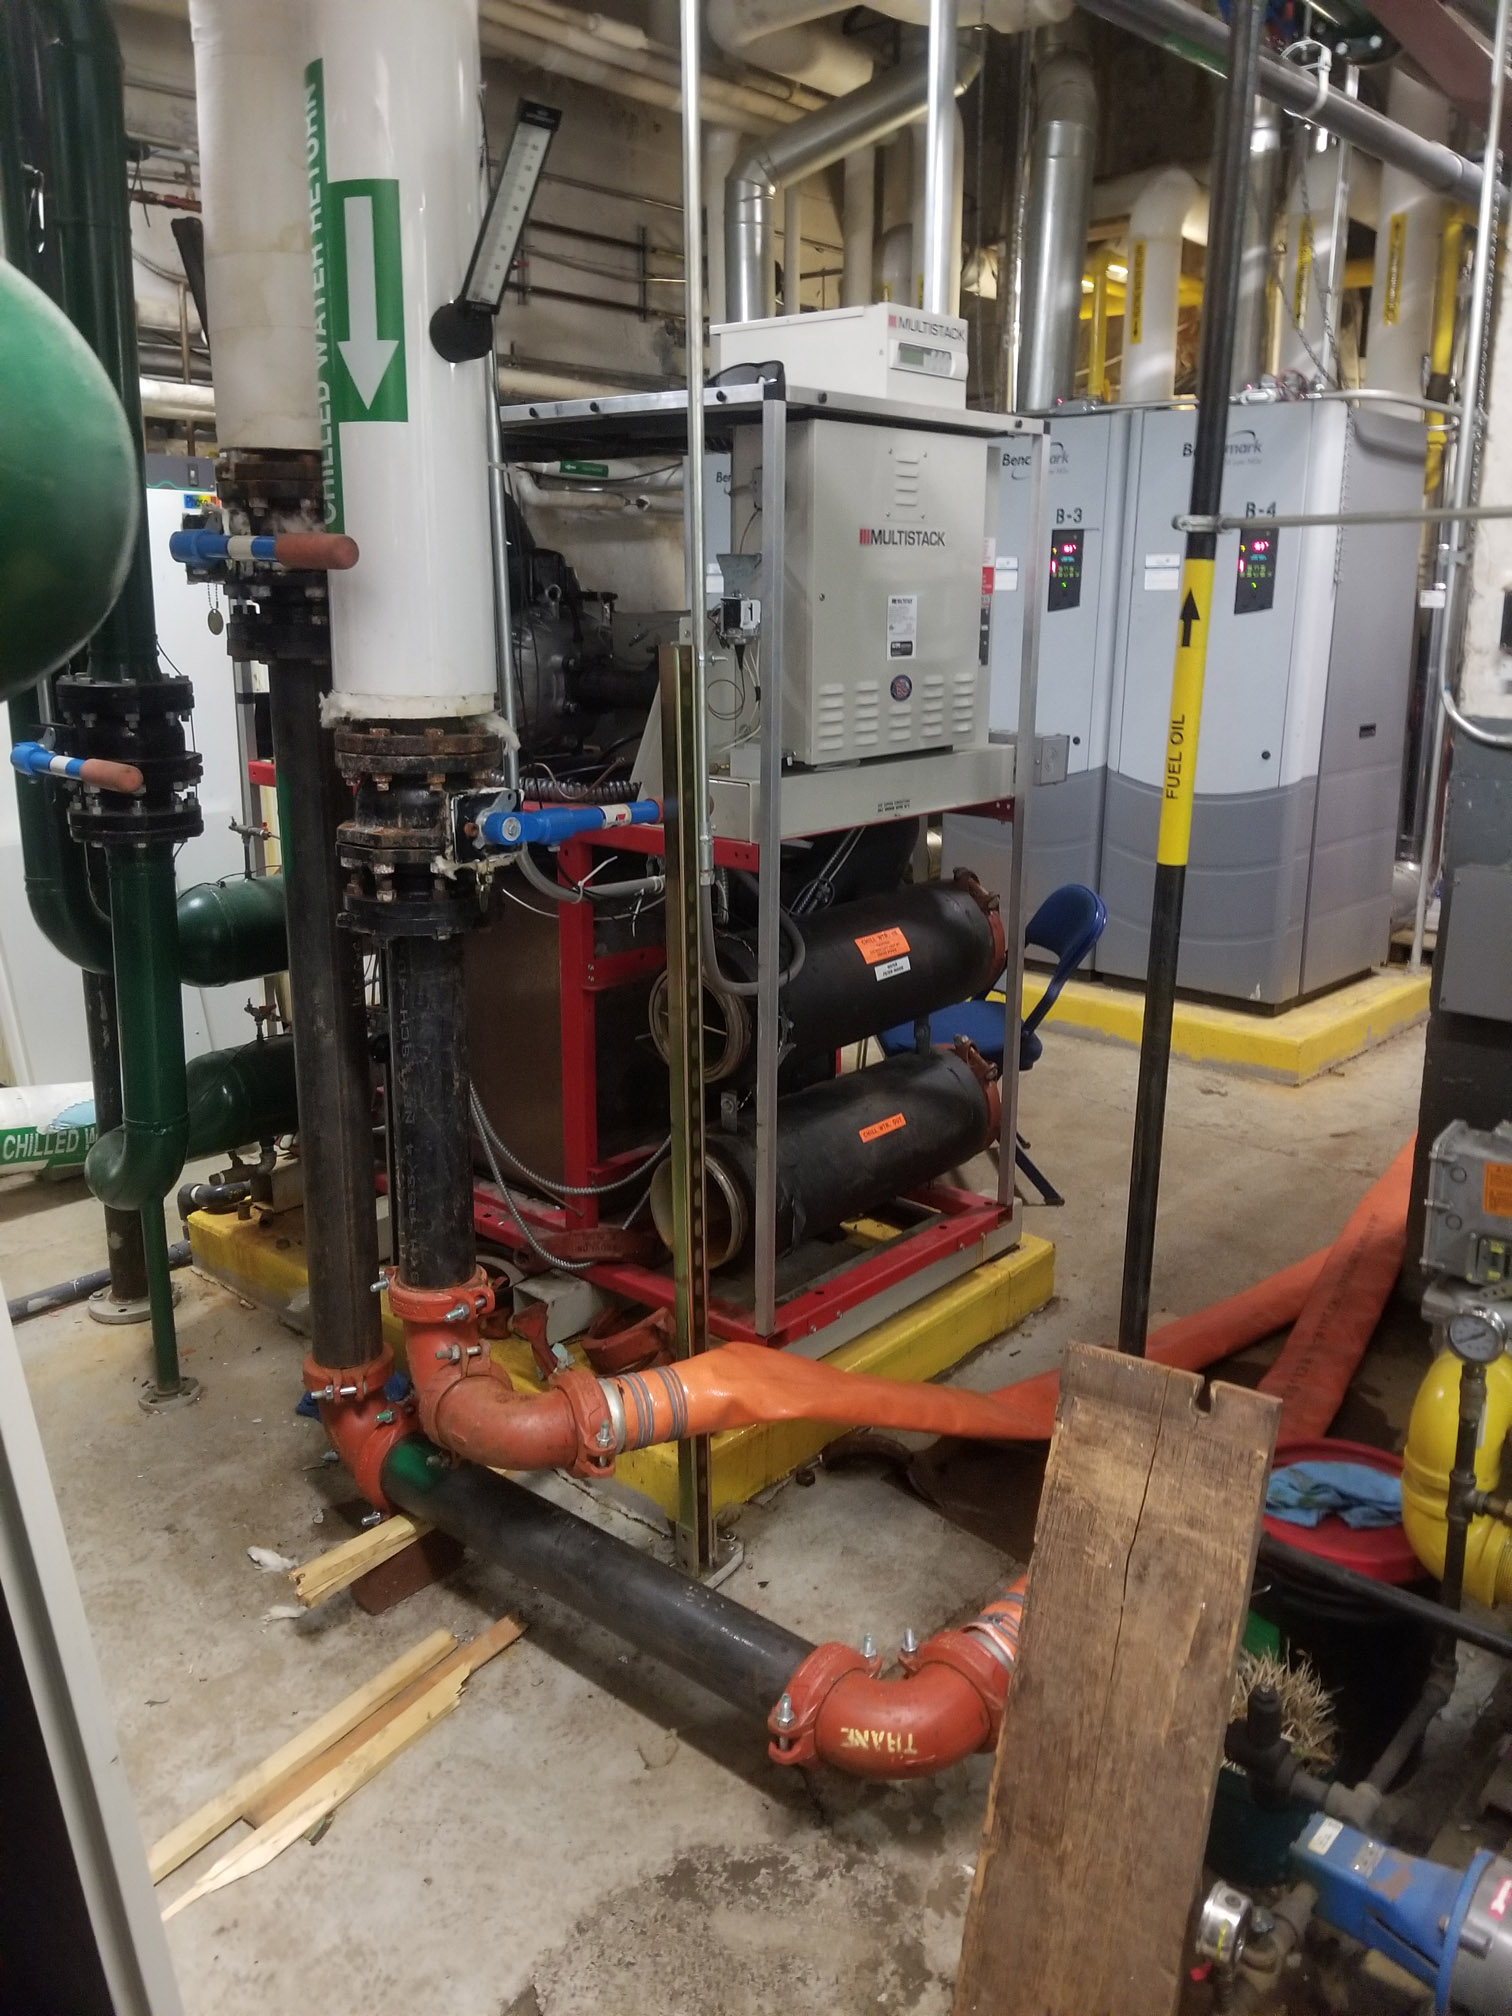 Air Cooled Chiller Rental Columbia County FL, Chiller AC Rental Columbia County FL, Temporary Chiller Columbia County FL, Rental Chiller Installation Columbia County FL